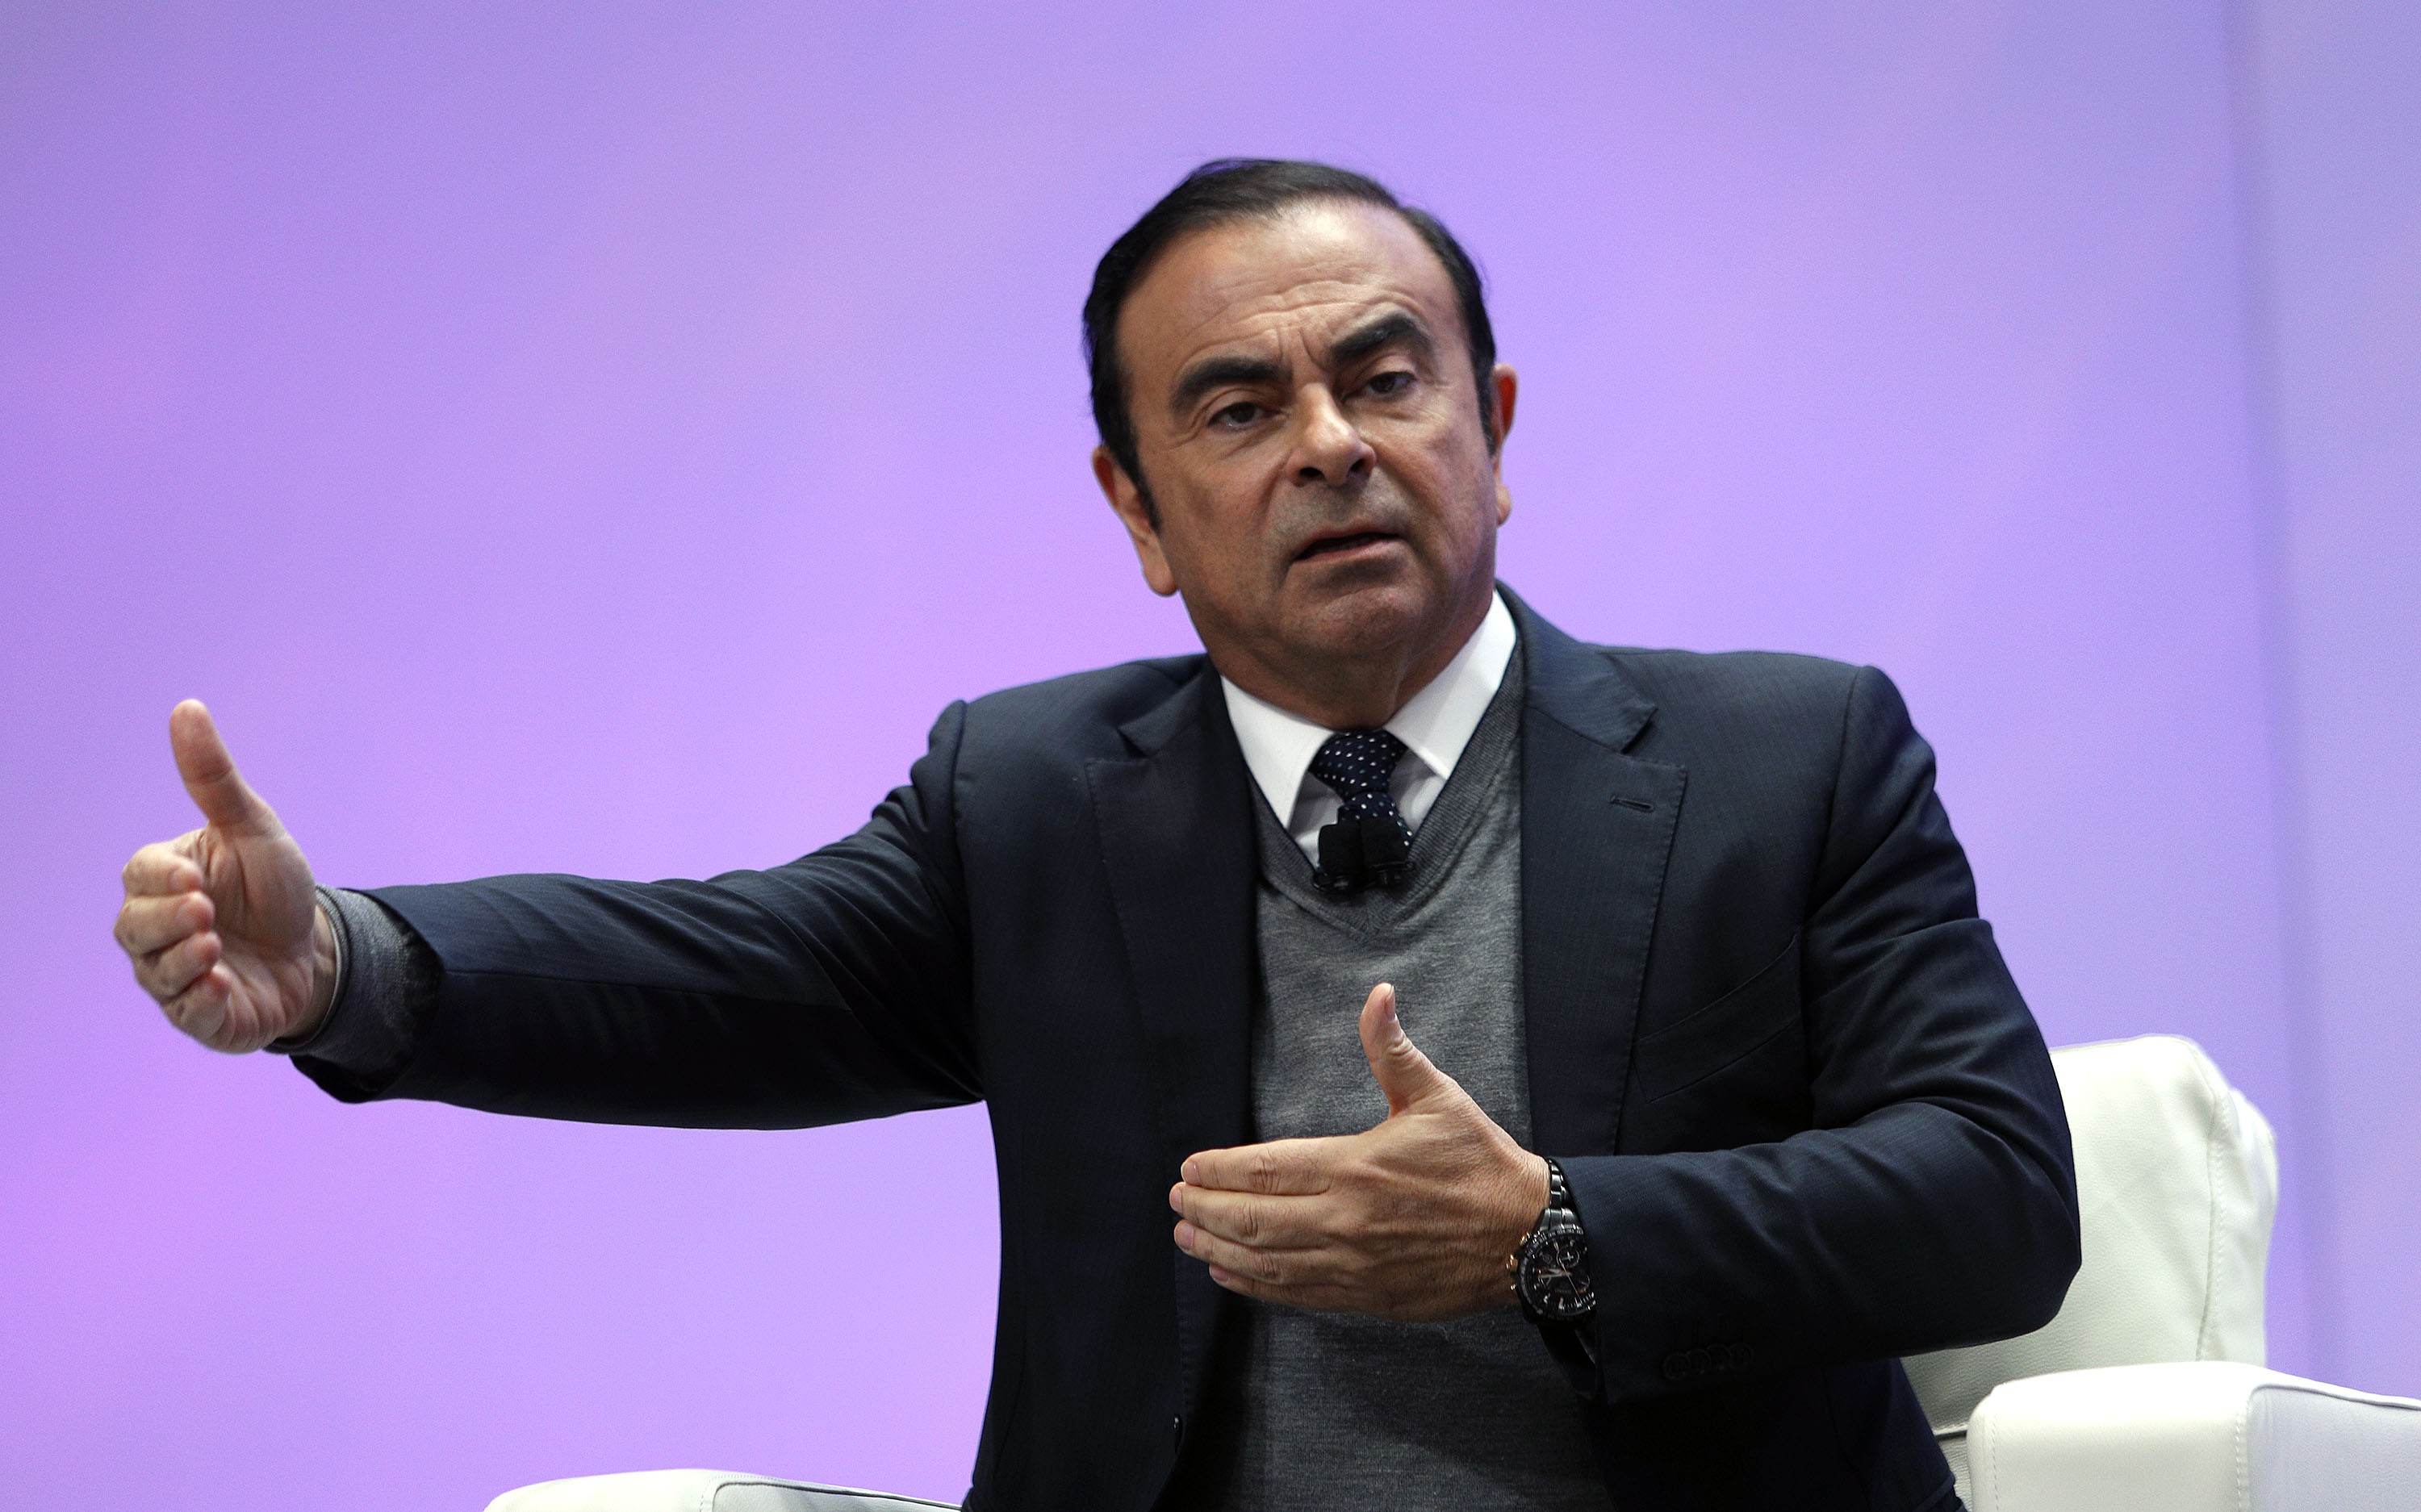 Carlos Ghosn, former Nissan CEO, speaks at the North American International Auto Show in Detroit in January 2017. Photo: AFP